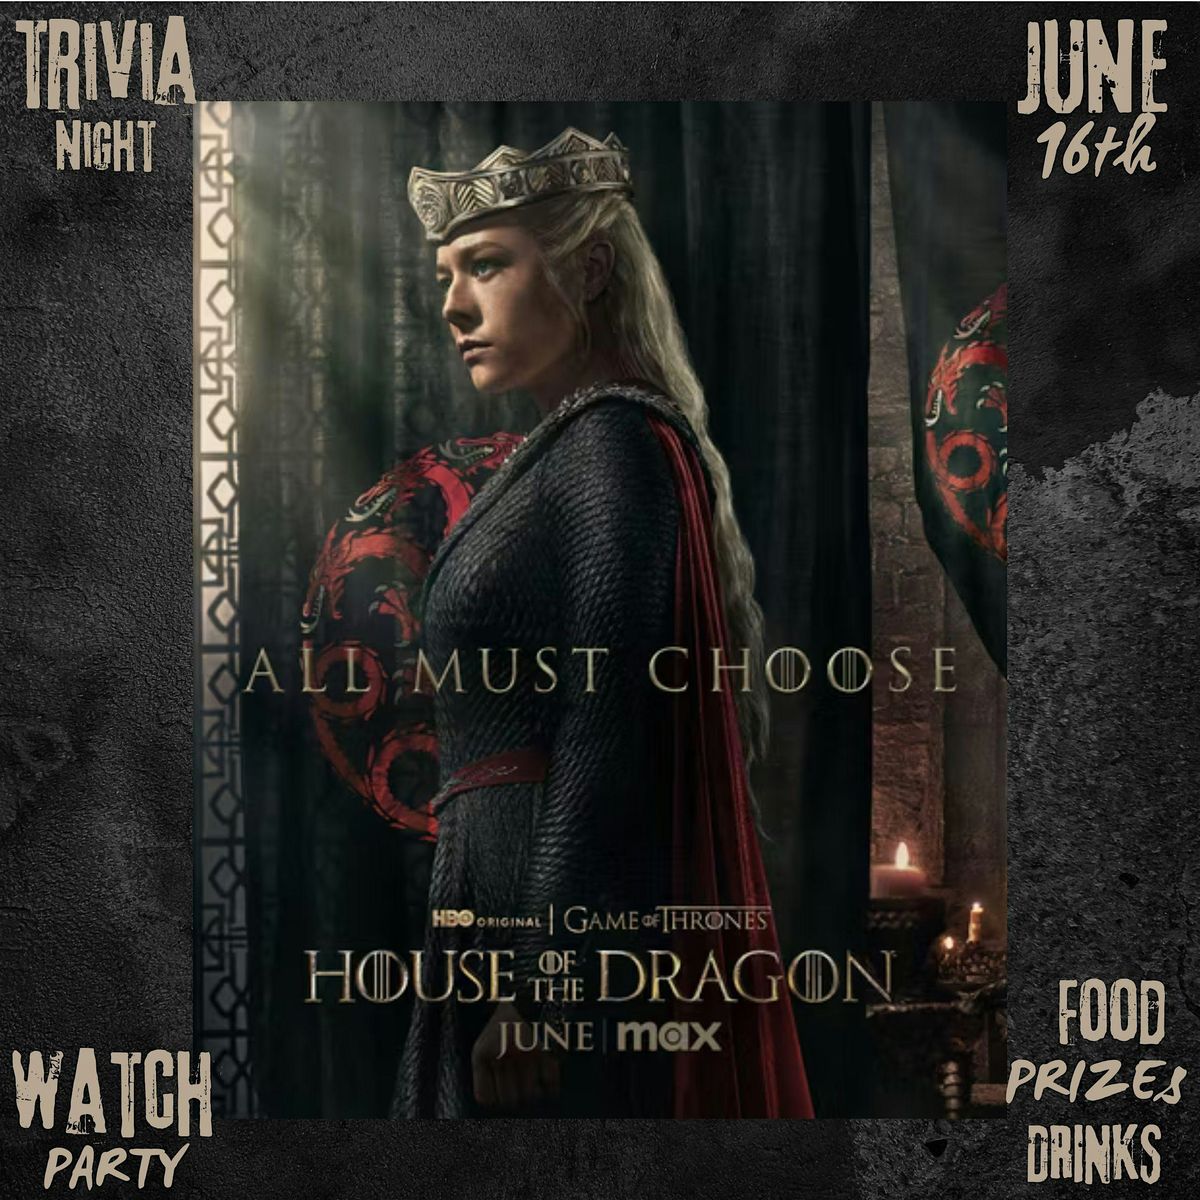 Game of Thrones: House of the Dragon Watch Party - Season 2 Premiere